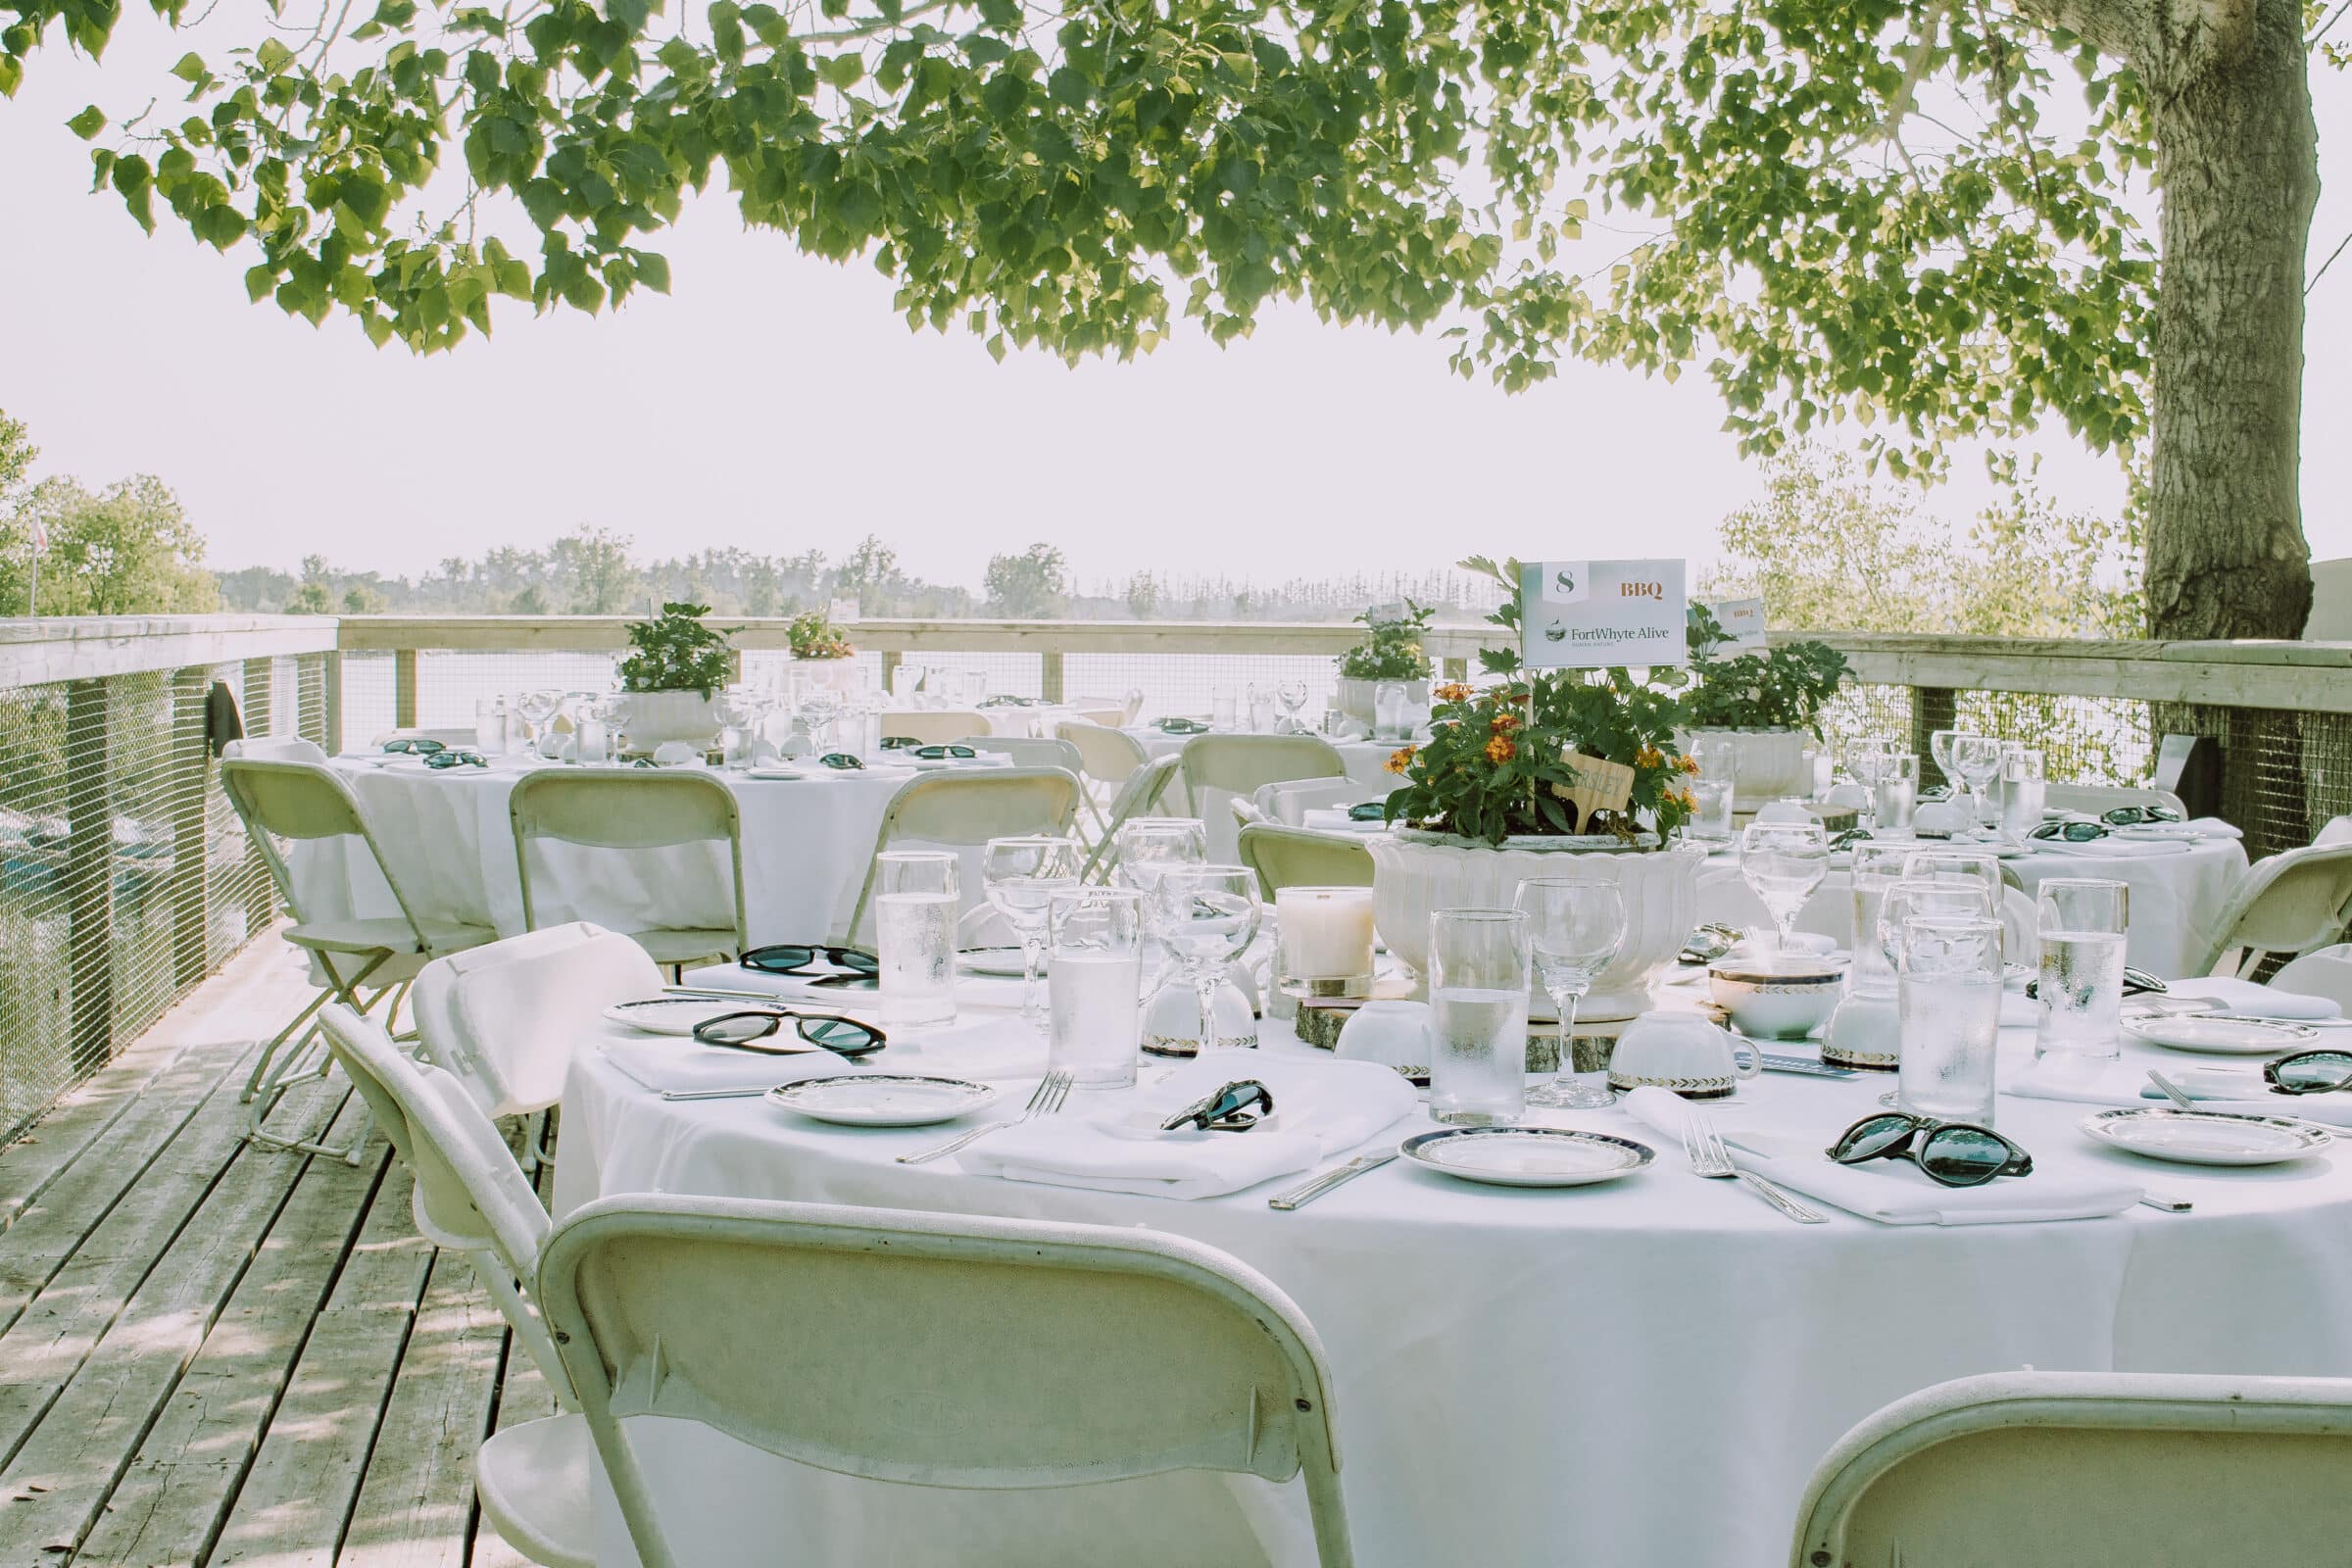 Tables on patio set with place settings on white tablecloth